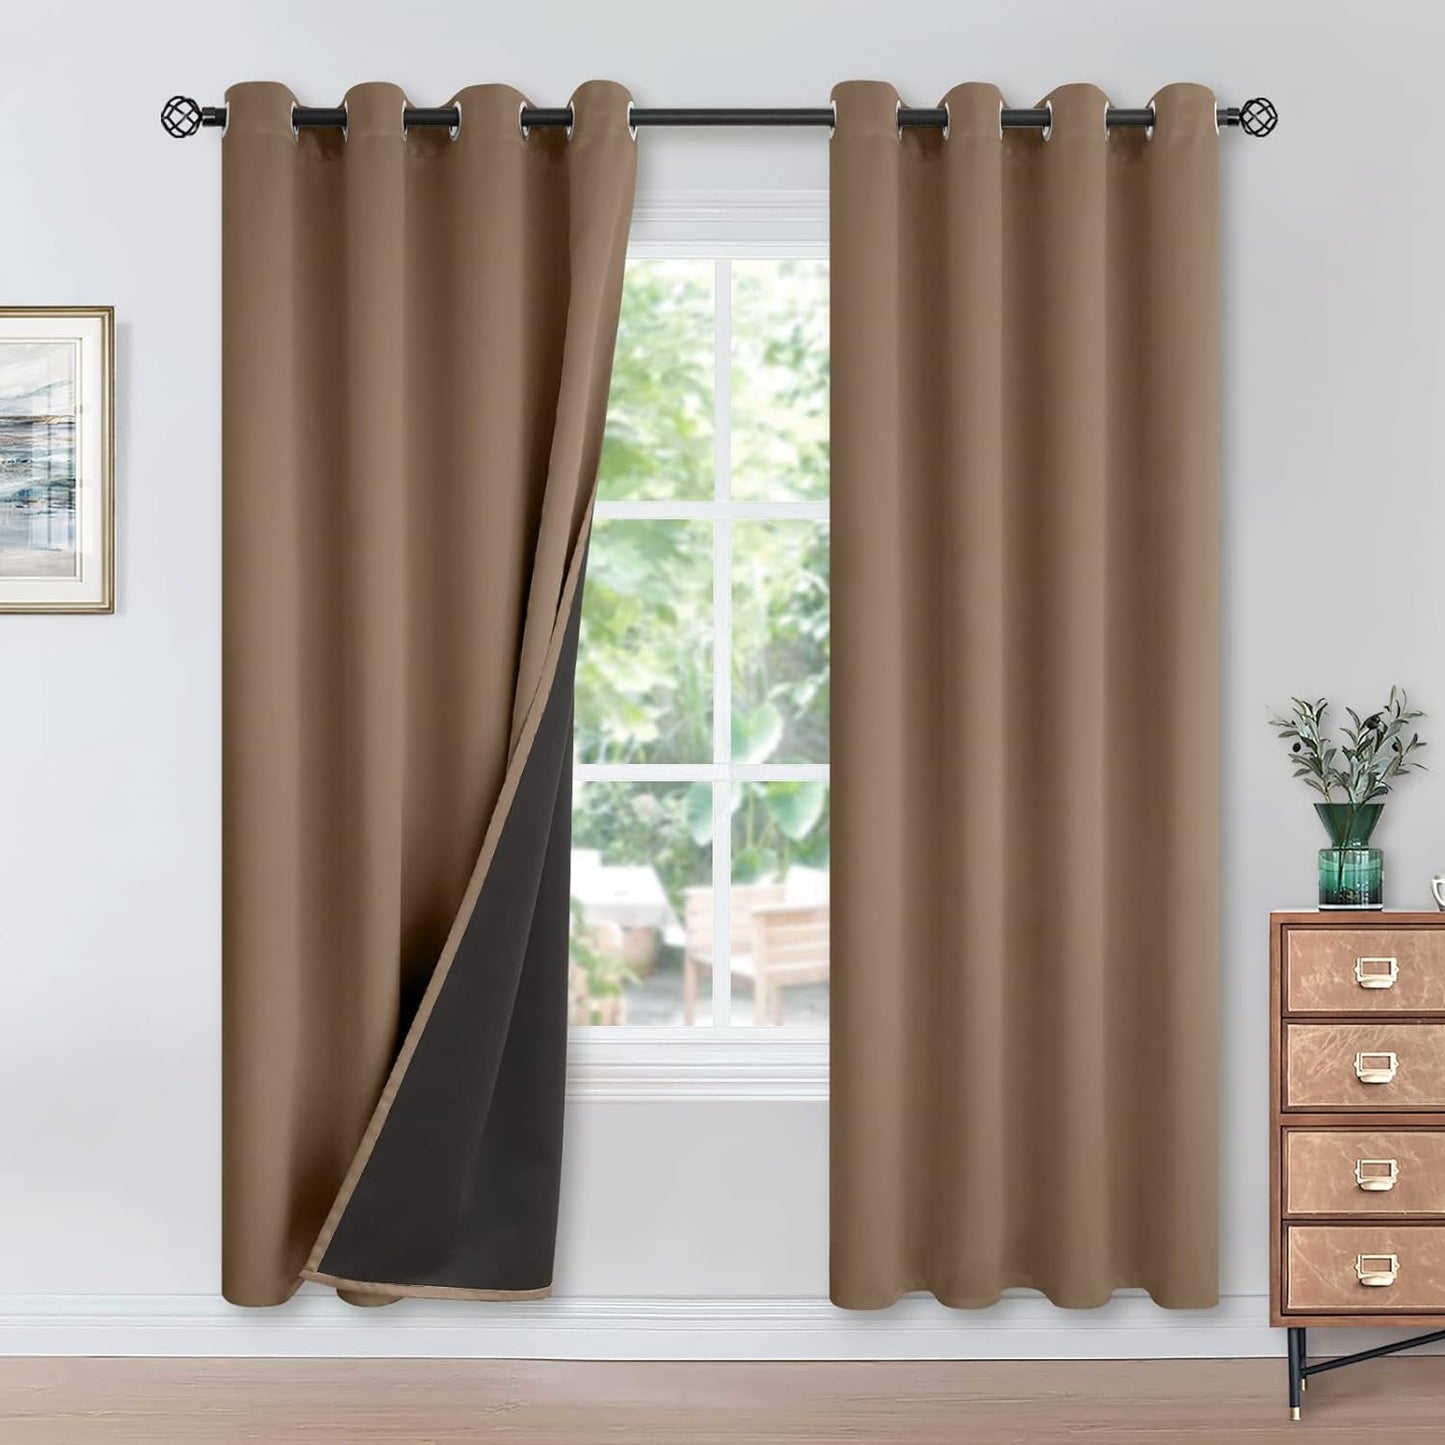 Youngstex Black 100% Blackout Curtains 63 Inches for Bedroom Thermal Insulated Total Room Darkening Curtains for Living Room Window with Black Back Grommet, 2 Panels, 42 X 63 Inch  YoungsTex Taupe 52W X 84L 